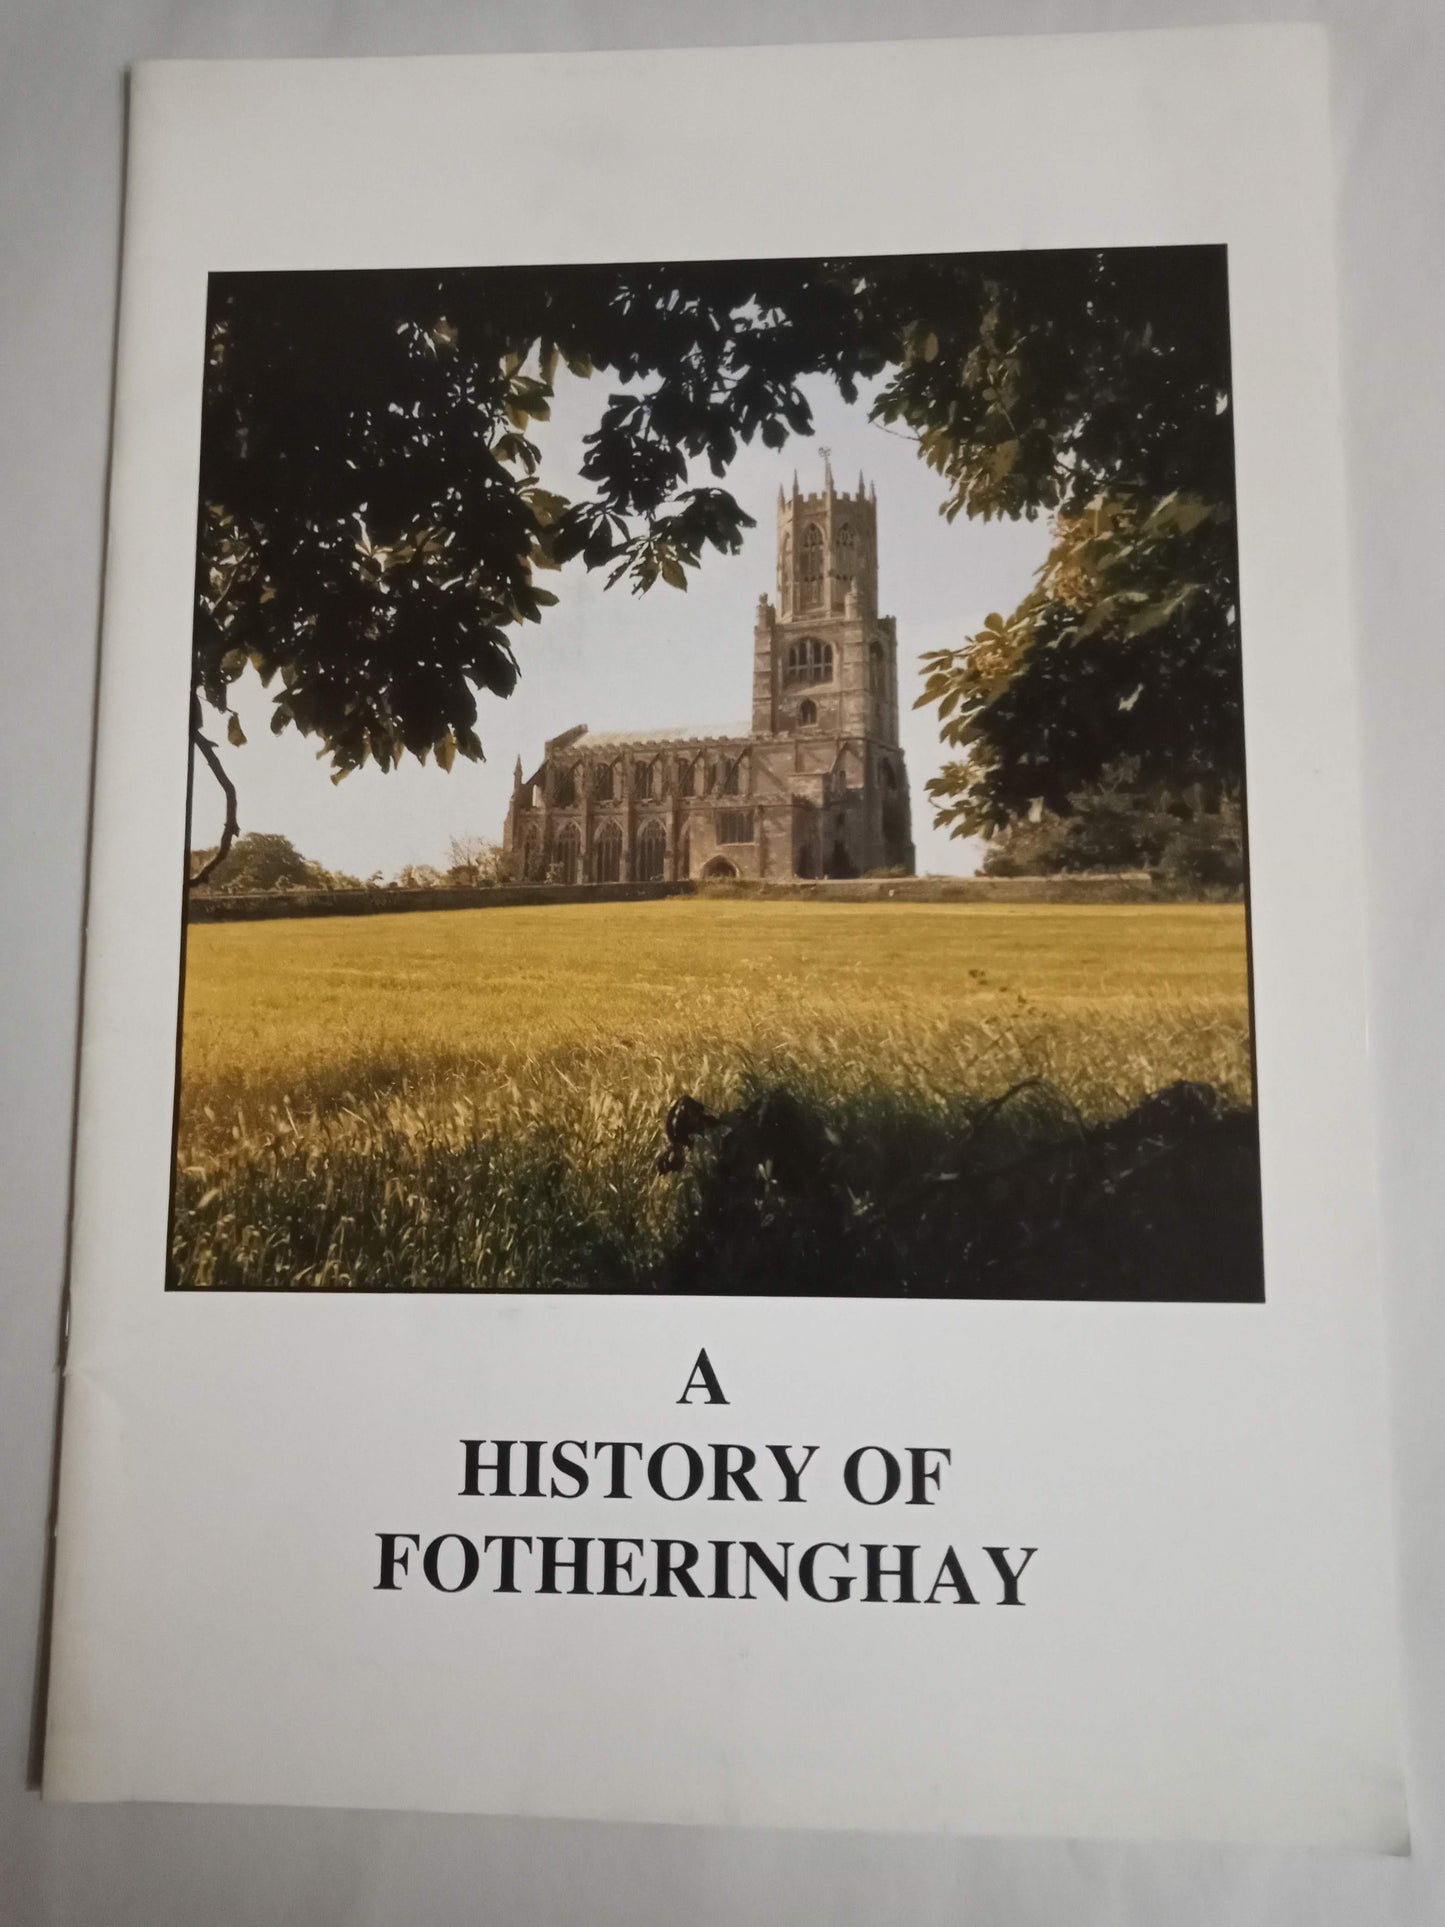 A History Of Fotheringhay